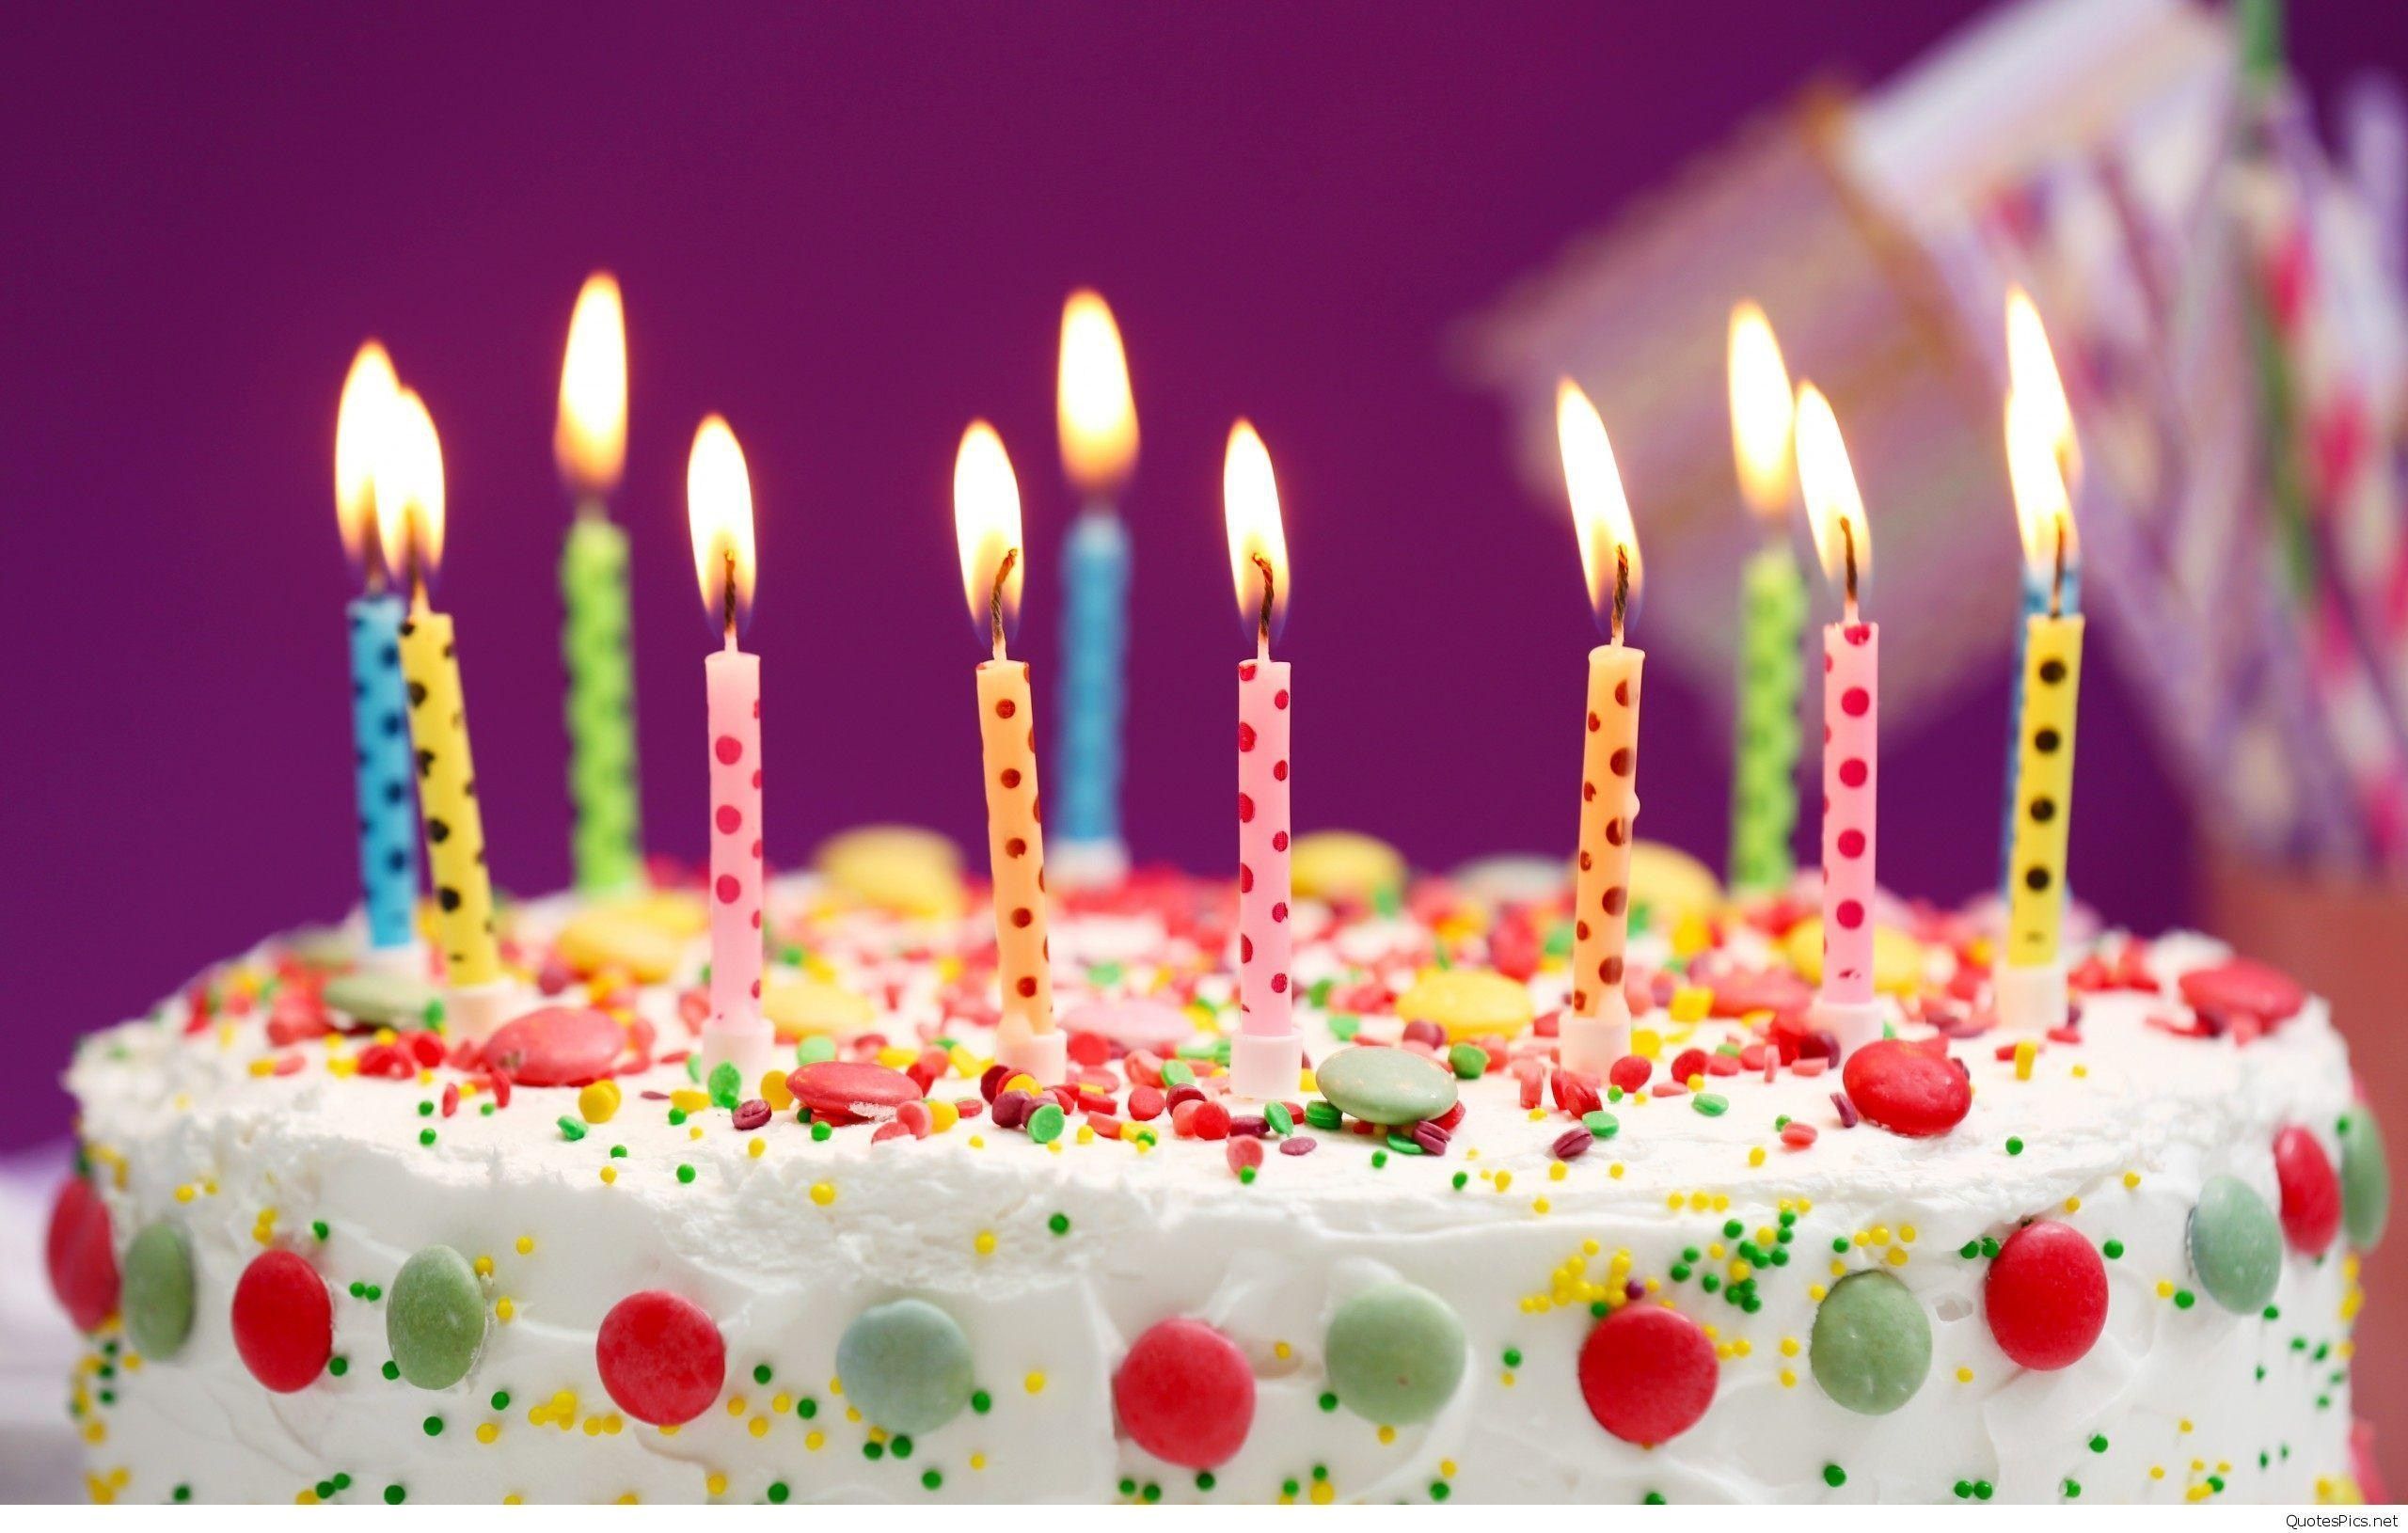 3,764,339 Cake Background Images, Stock Photos, 3D objects, & Vectors |  Shutterstock